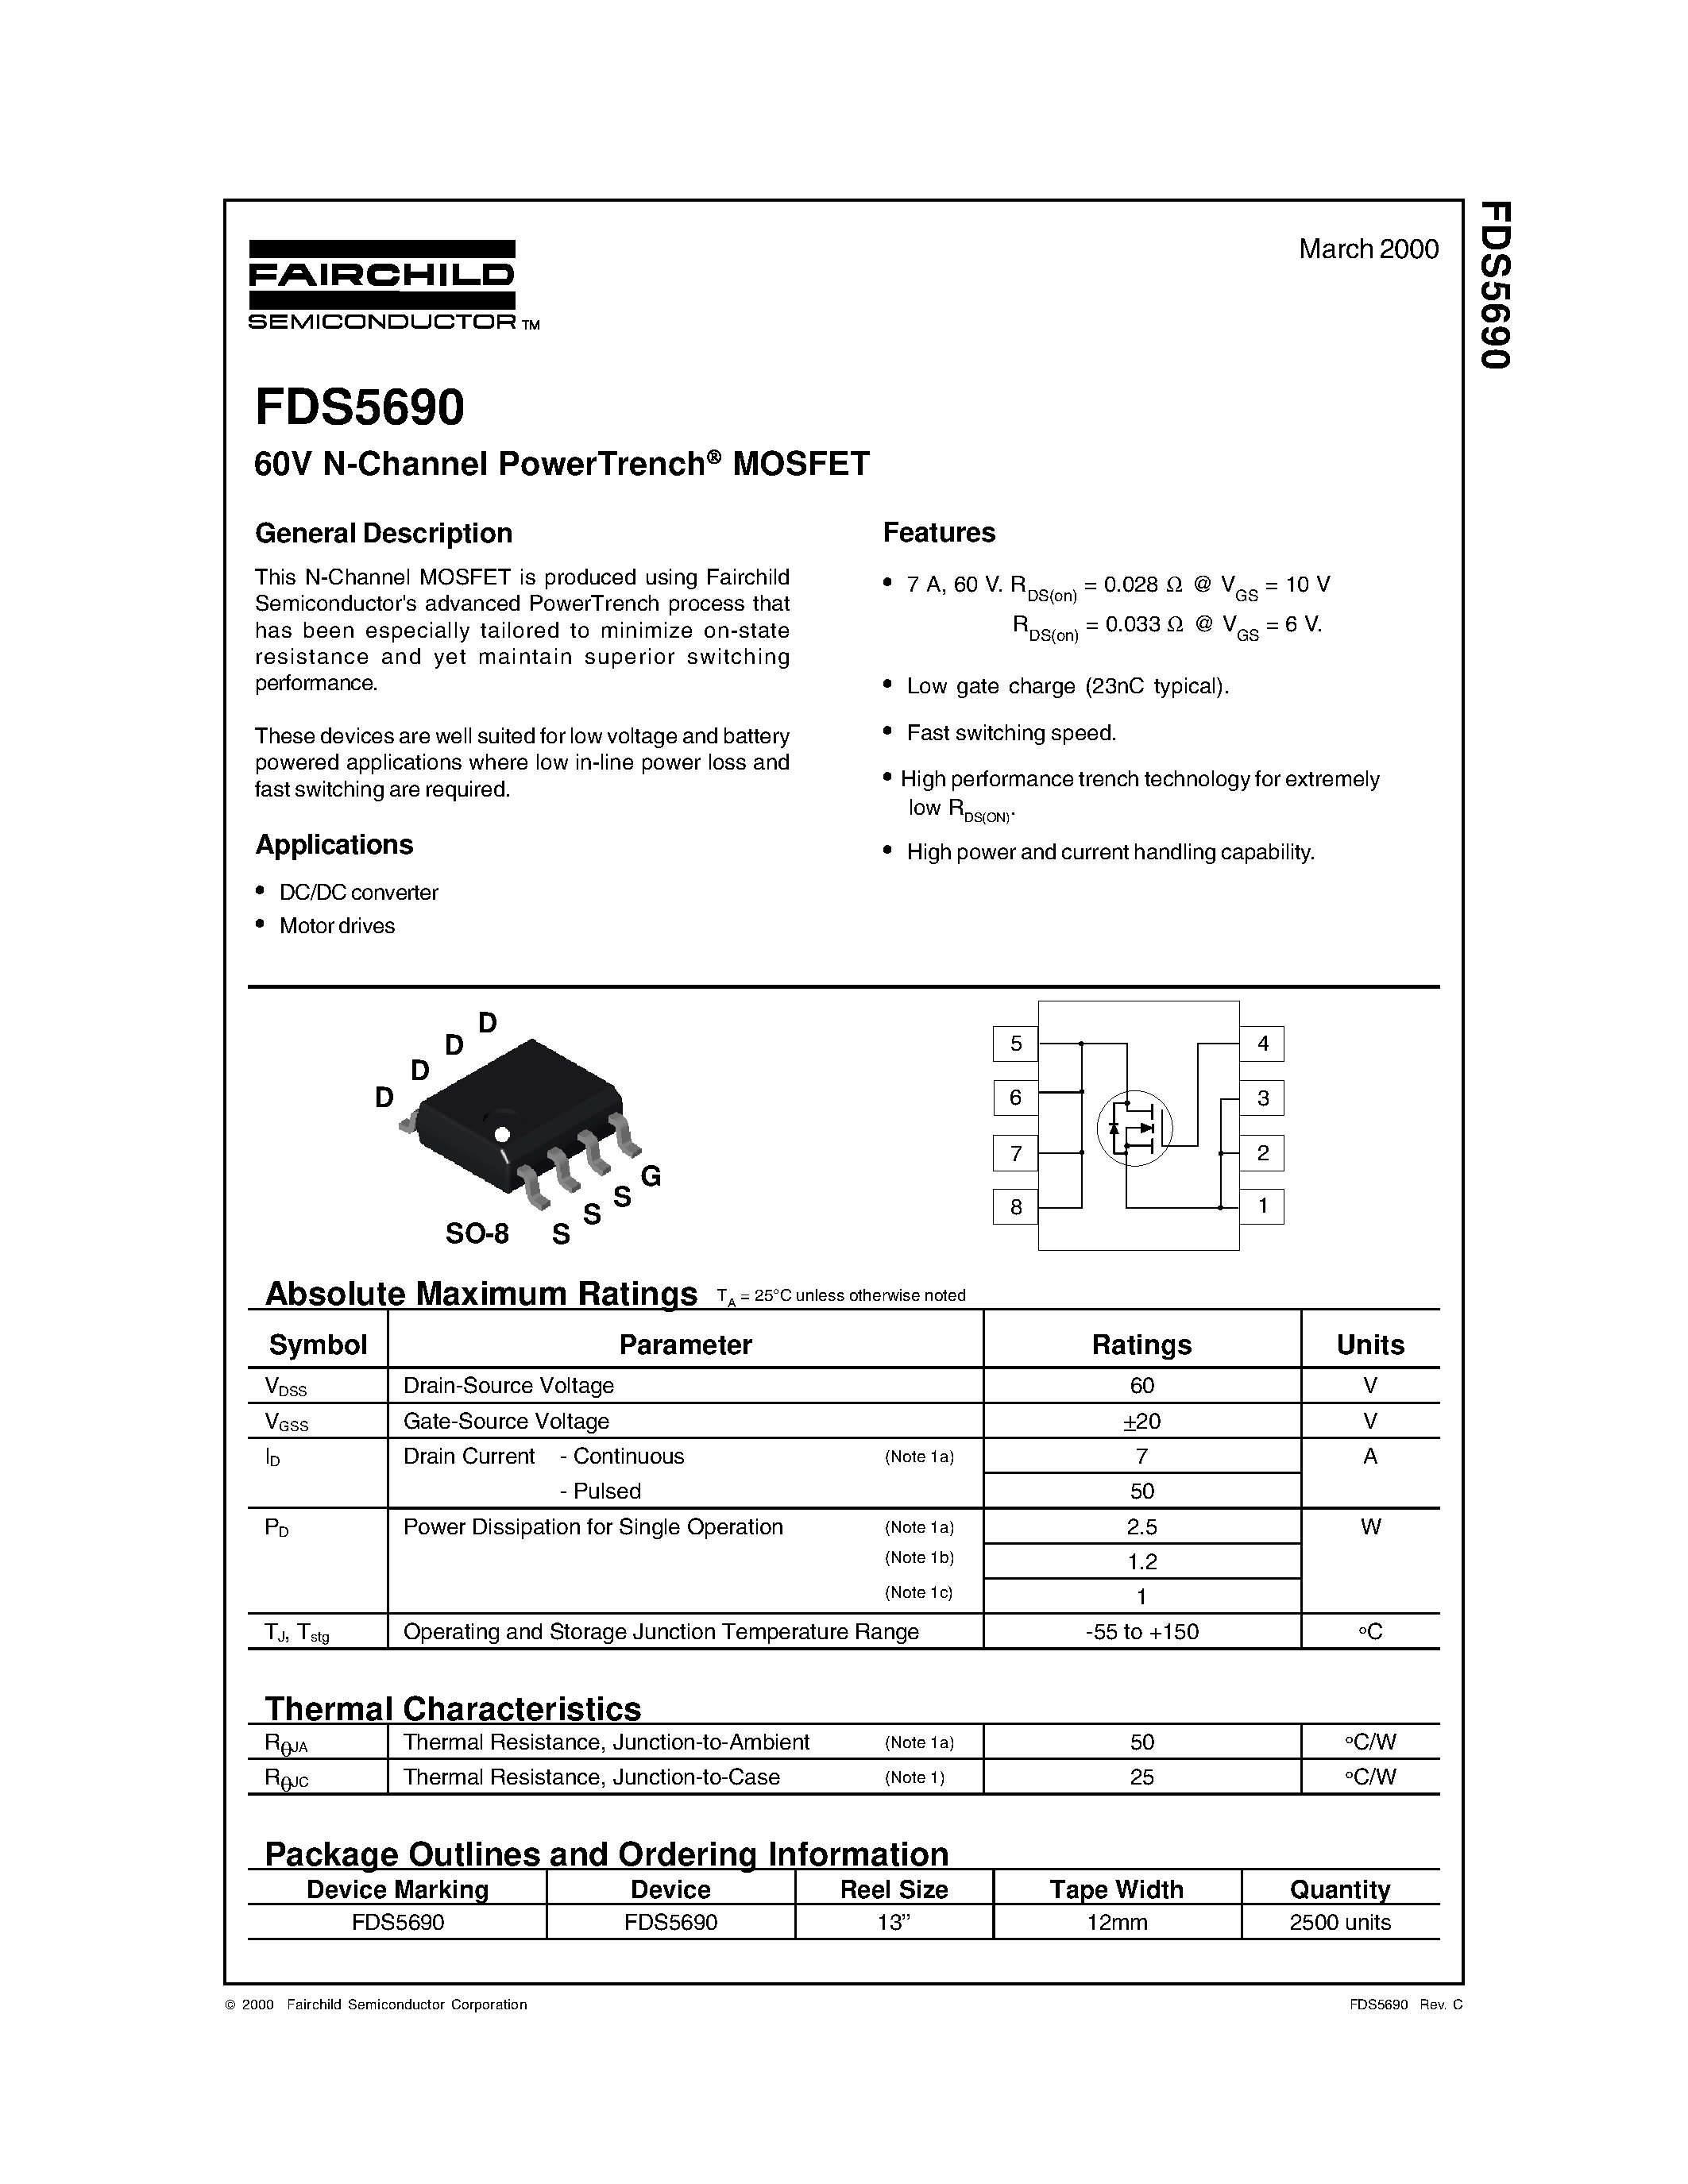 Datasheet FDS5690 - 60V N-Channel PowerTrench MOSFET page 1